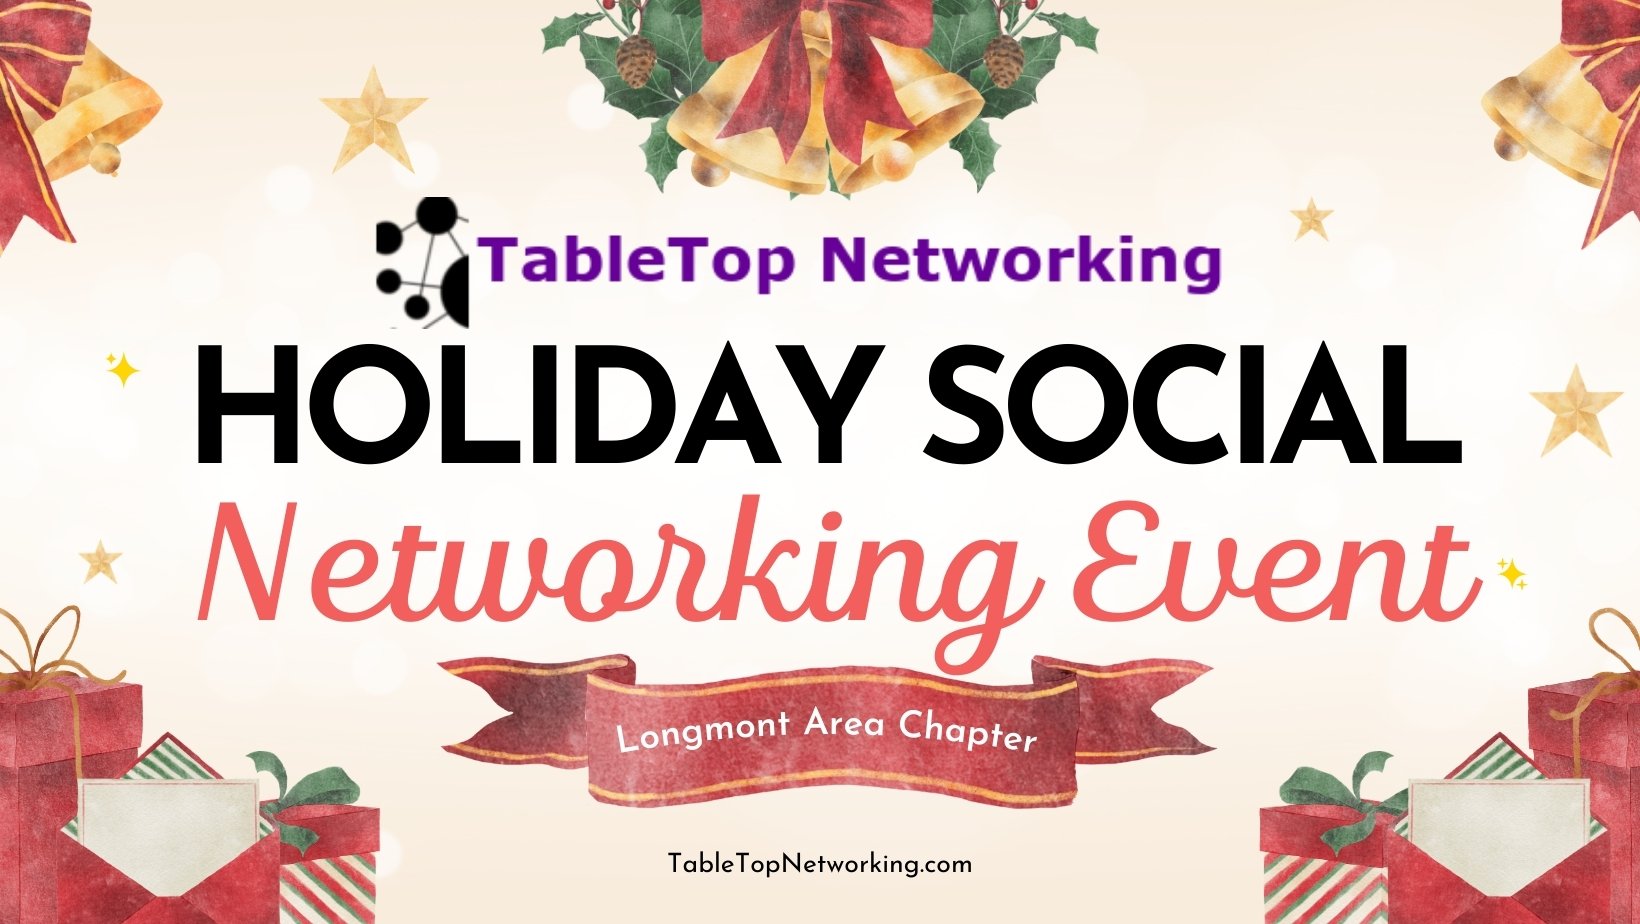 December Social Event for the Longmont Area Chapters of TableTop Networking